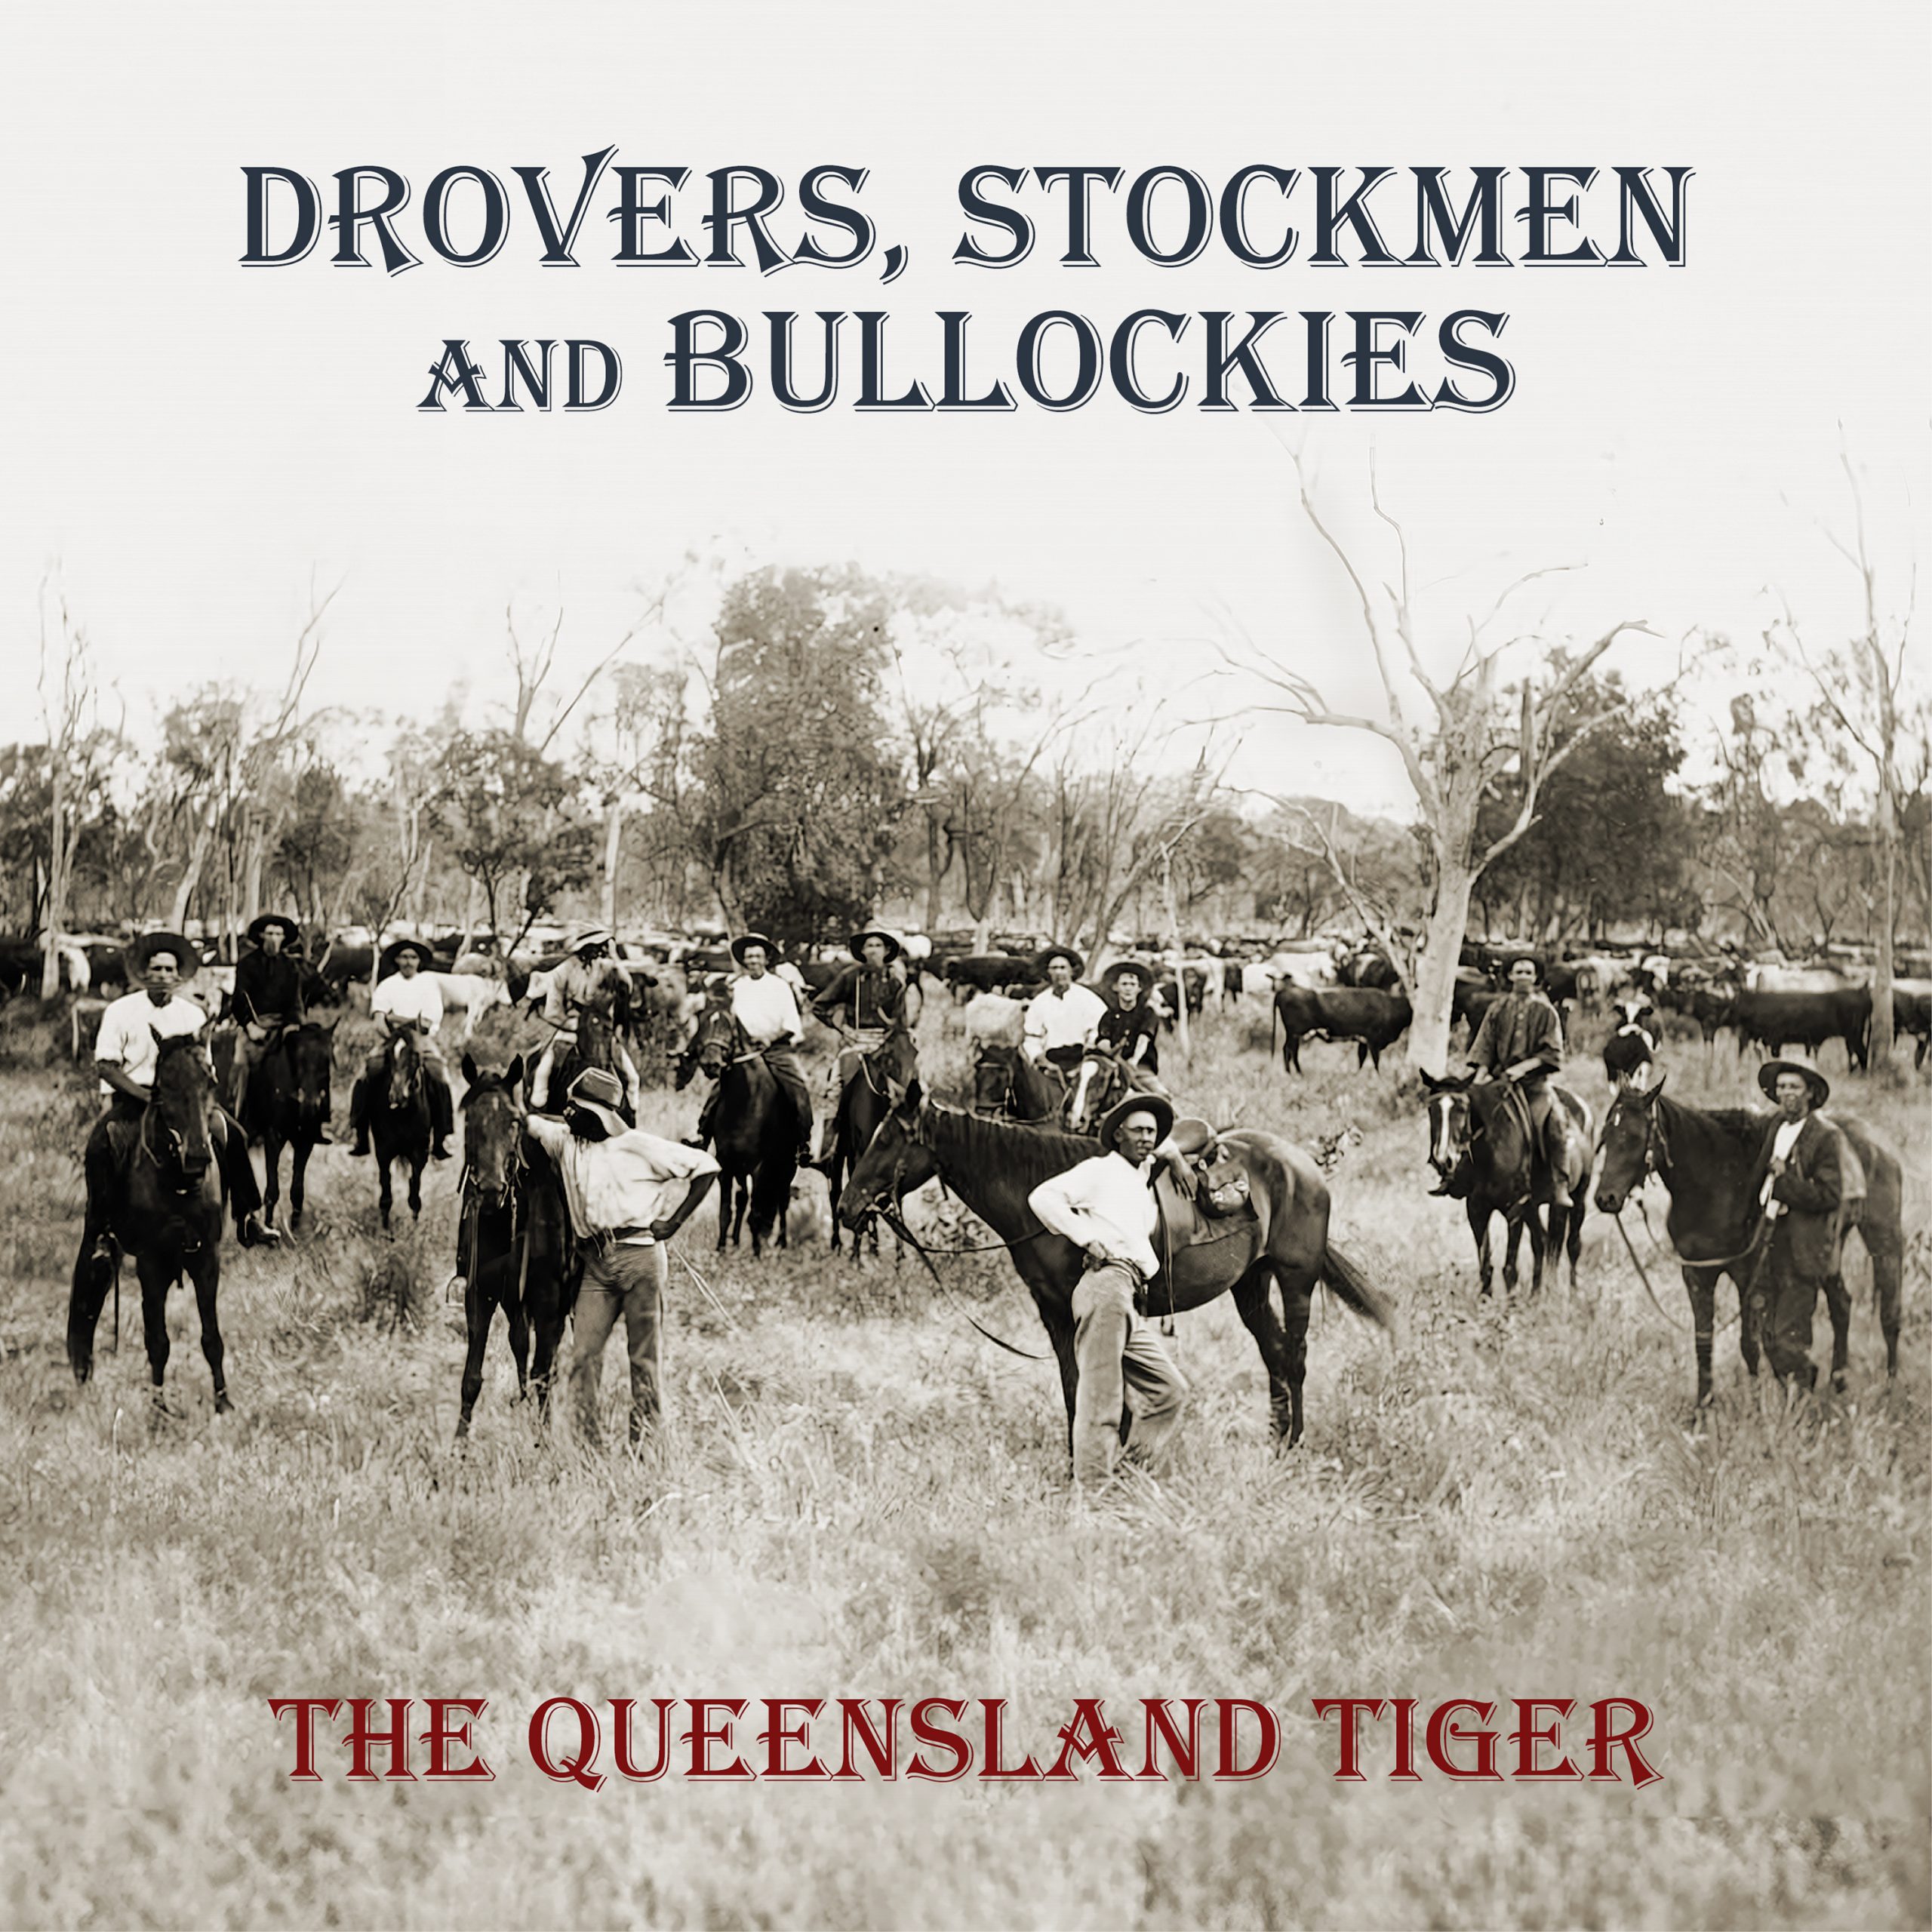 The Queensland Tiger’s ‘The Diamantina Drover’: A Journey into Australian Folklore on the playlist